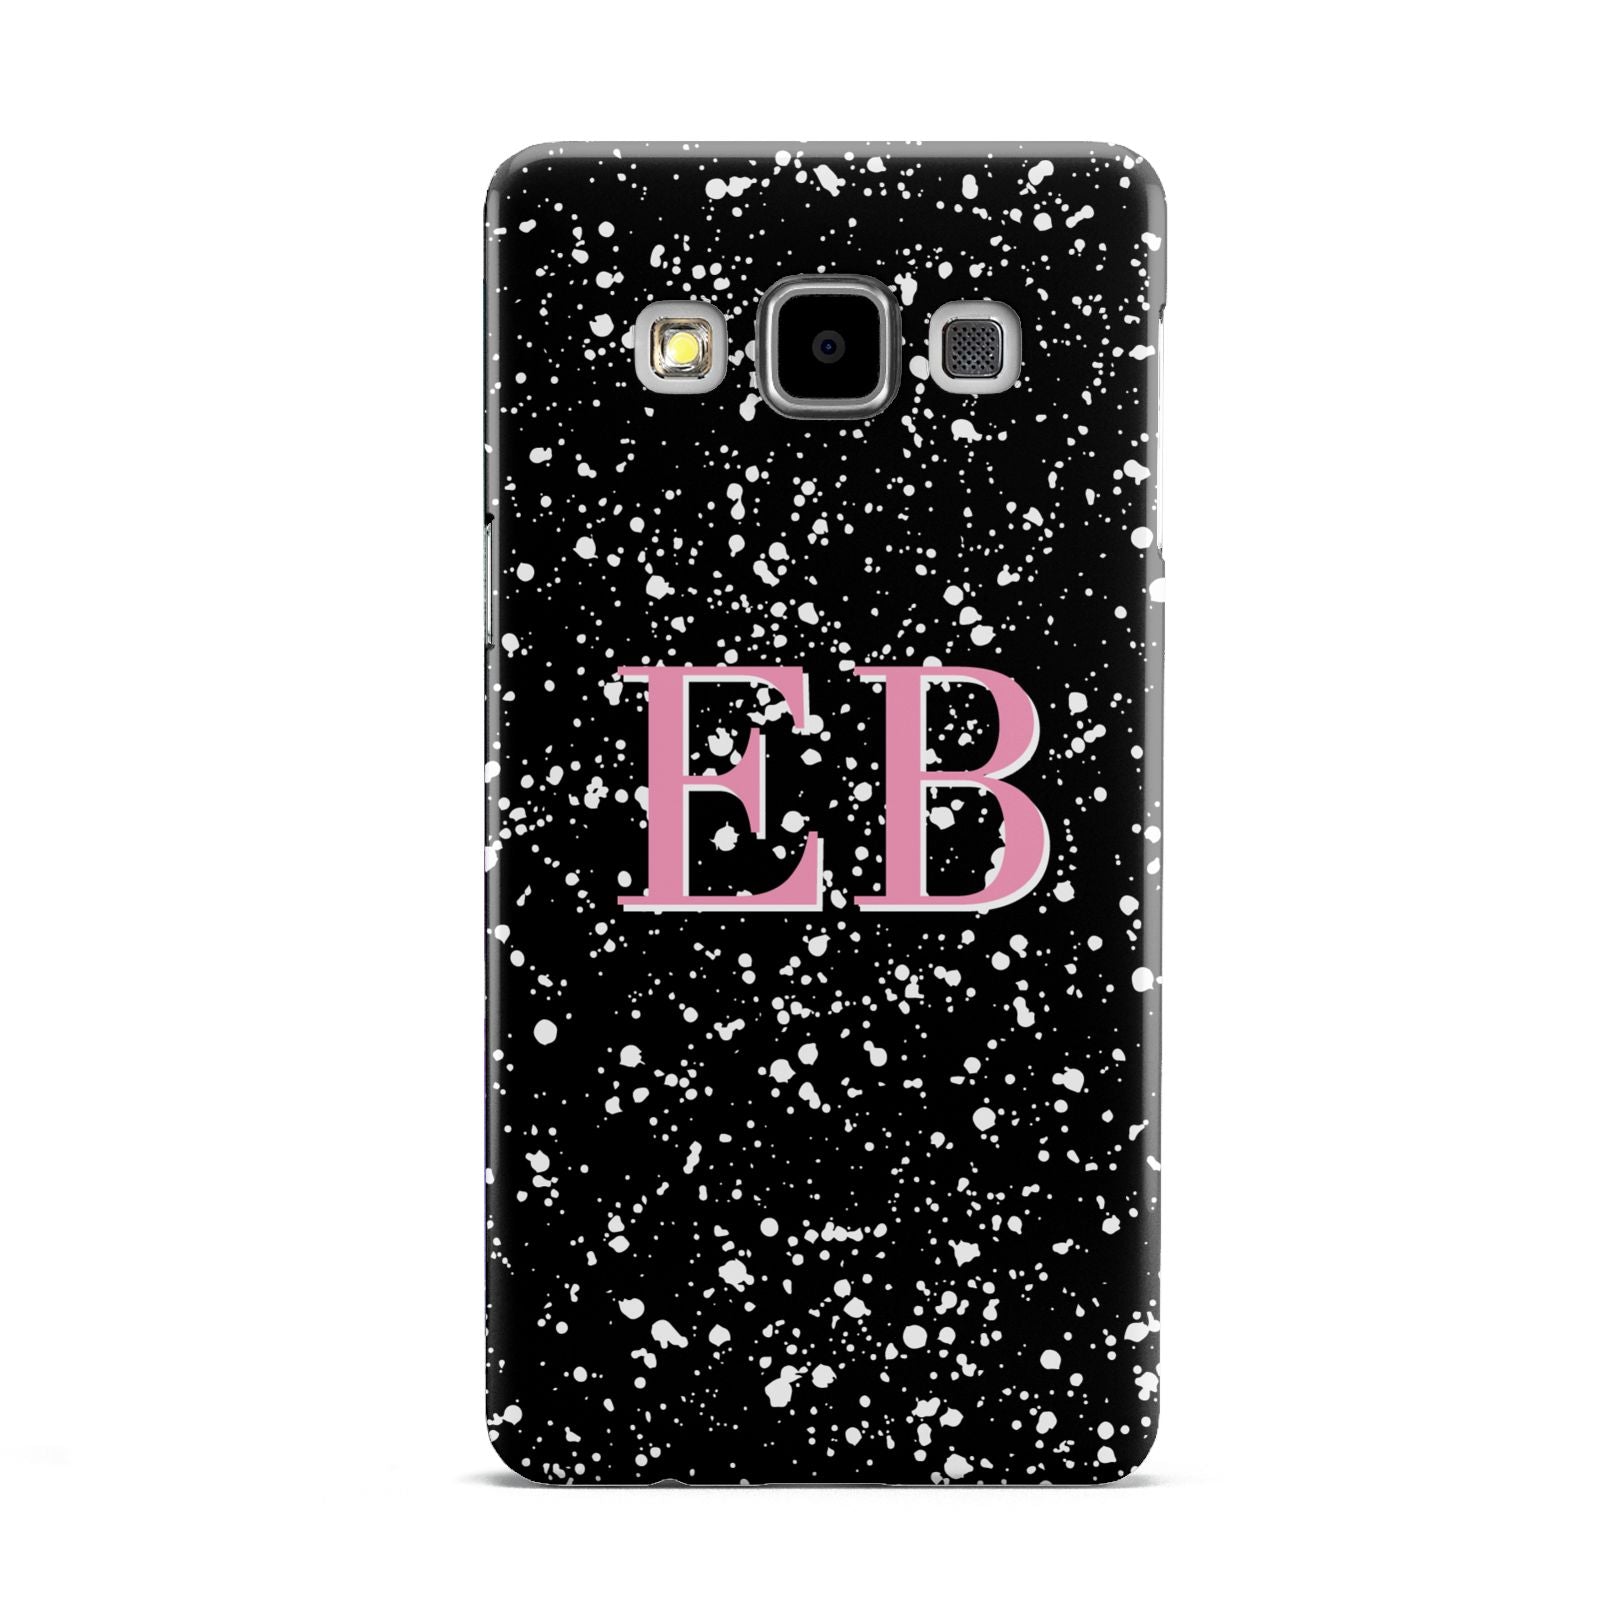 Personalised Black Ink Splat Initials Samsung Galaxy A5 Case